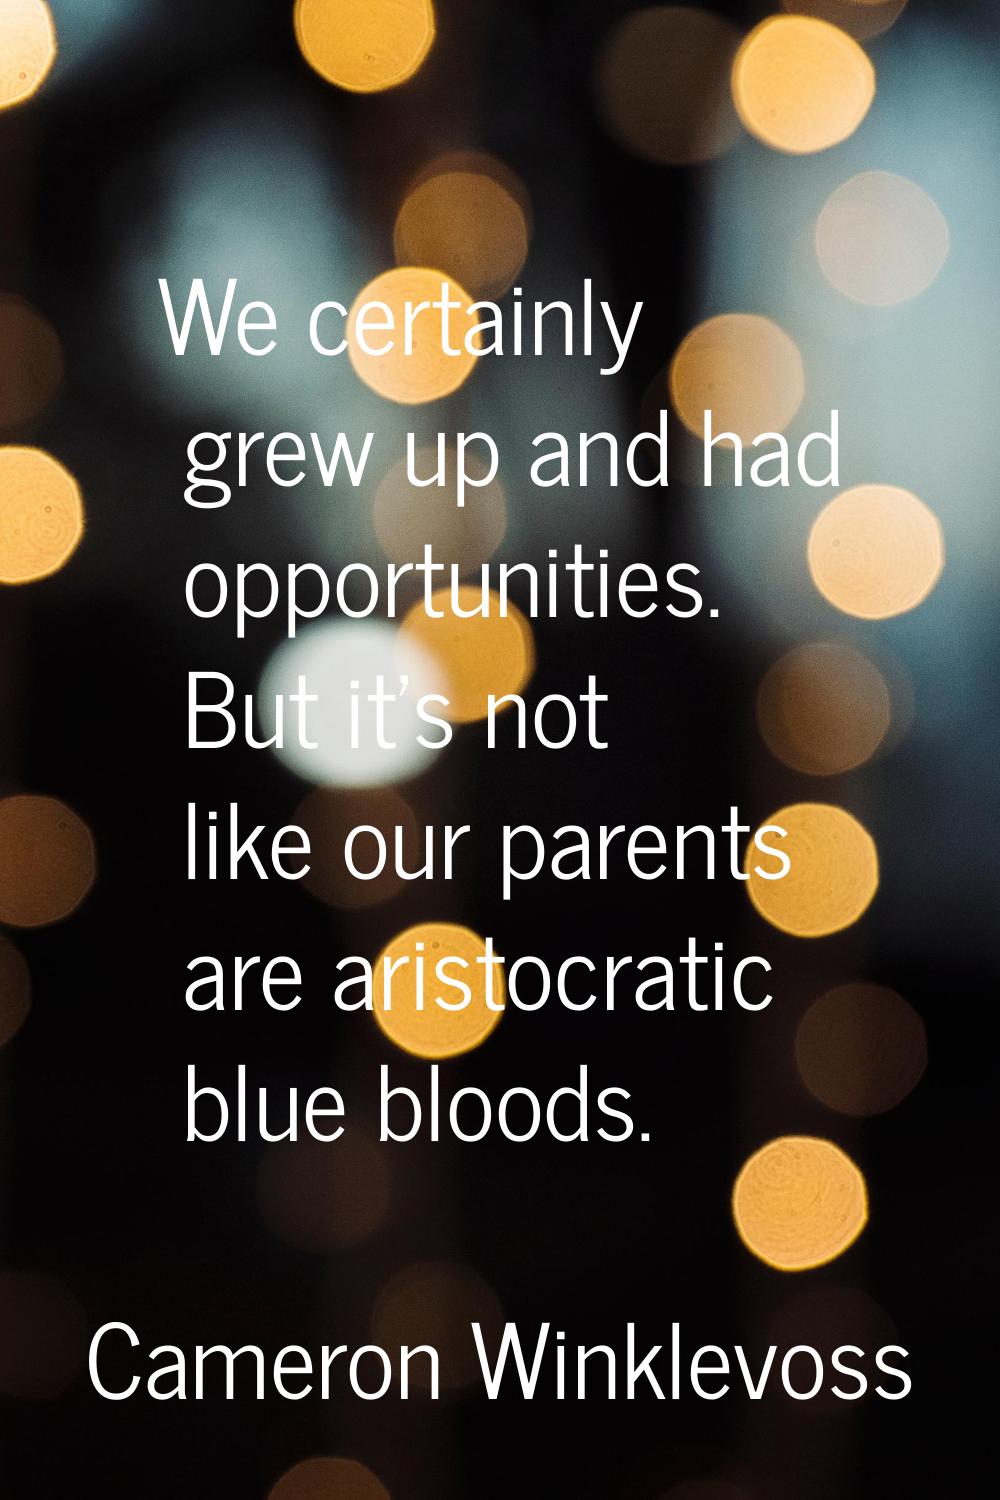 We certainly grew up and had opportunities. But it's not like our parents are aristocratic blue blo